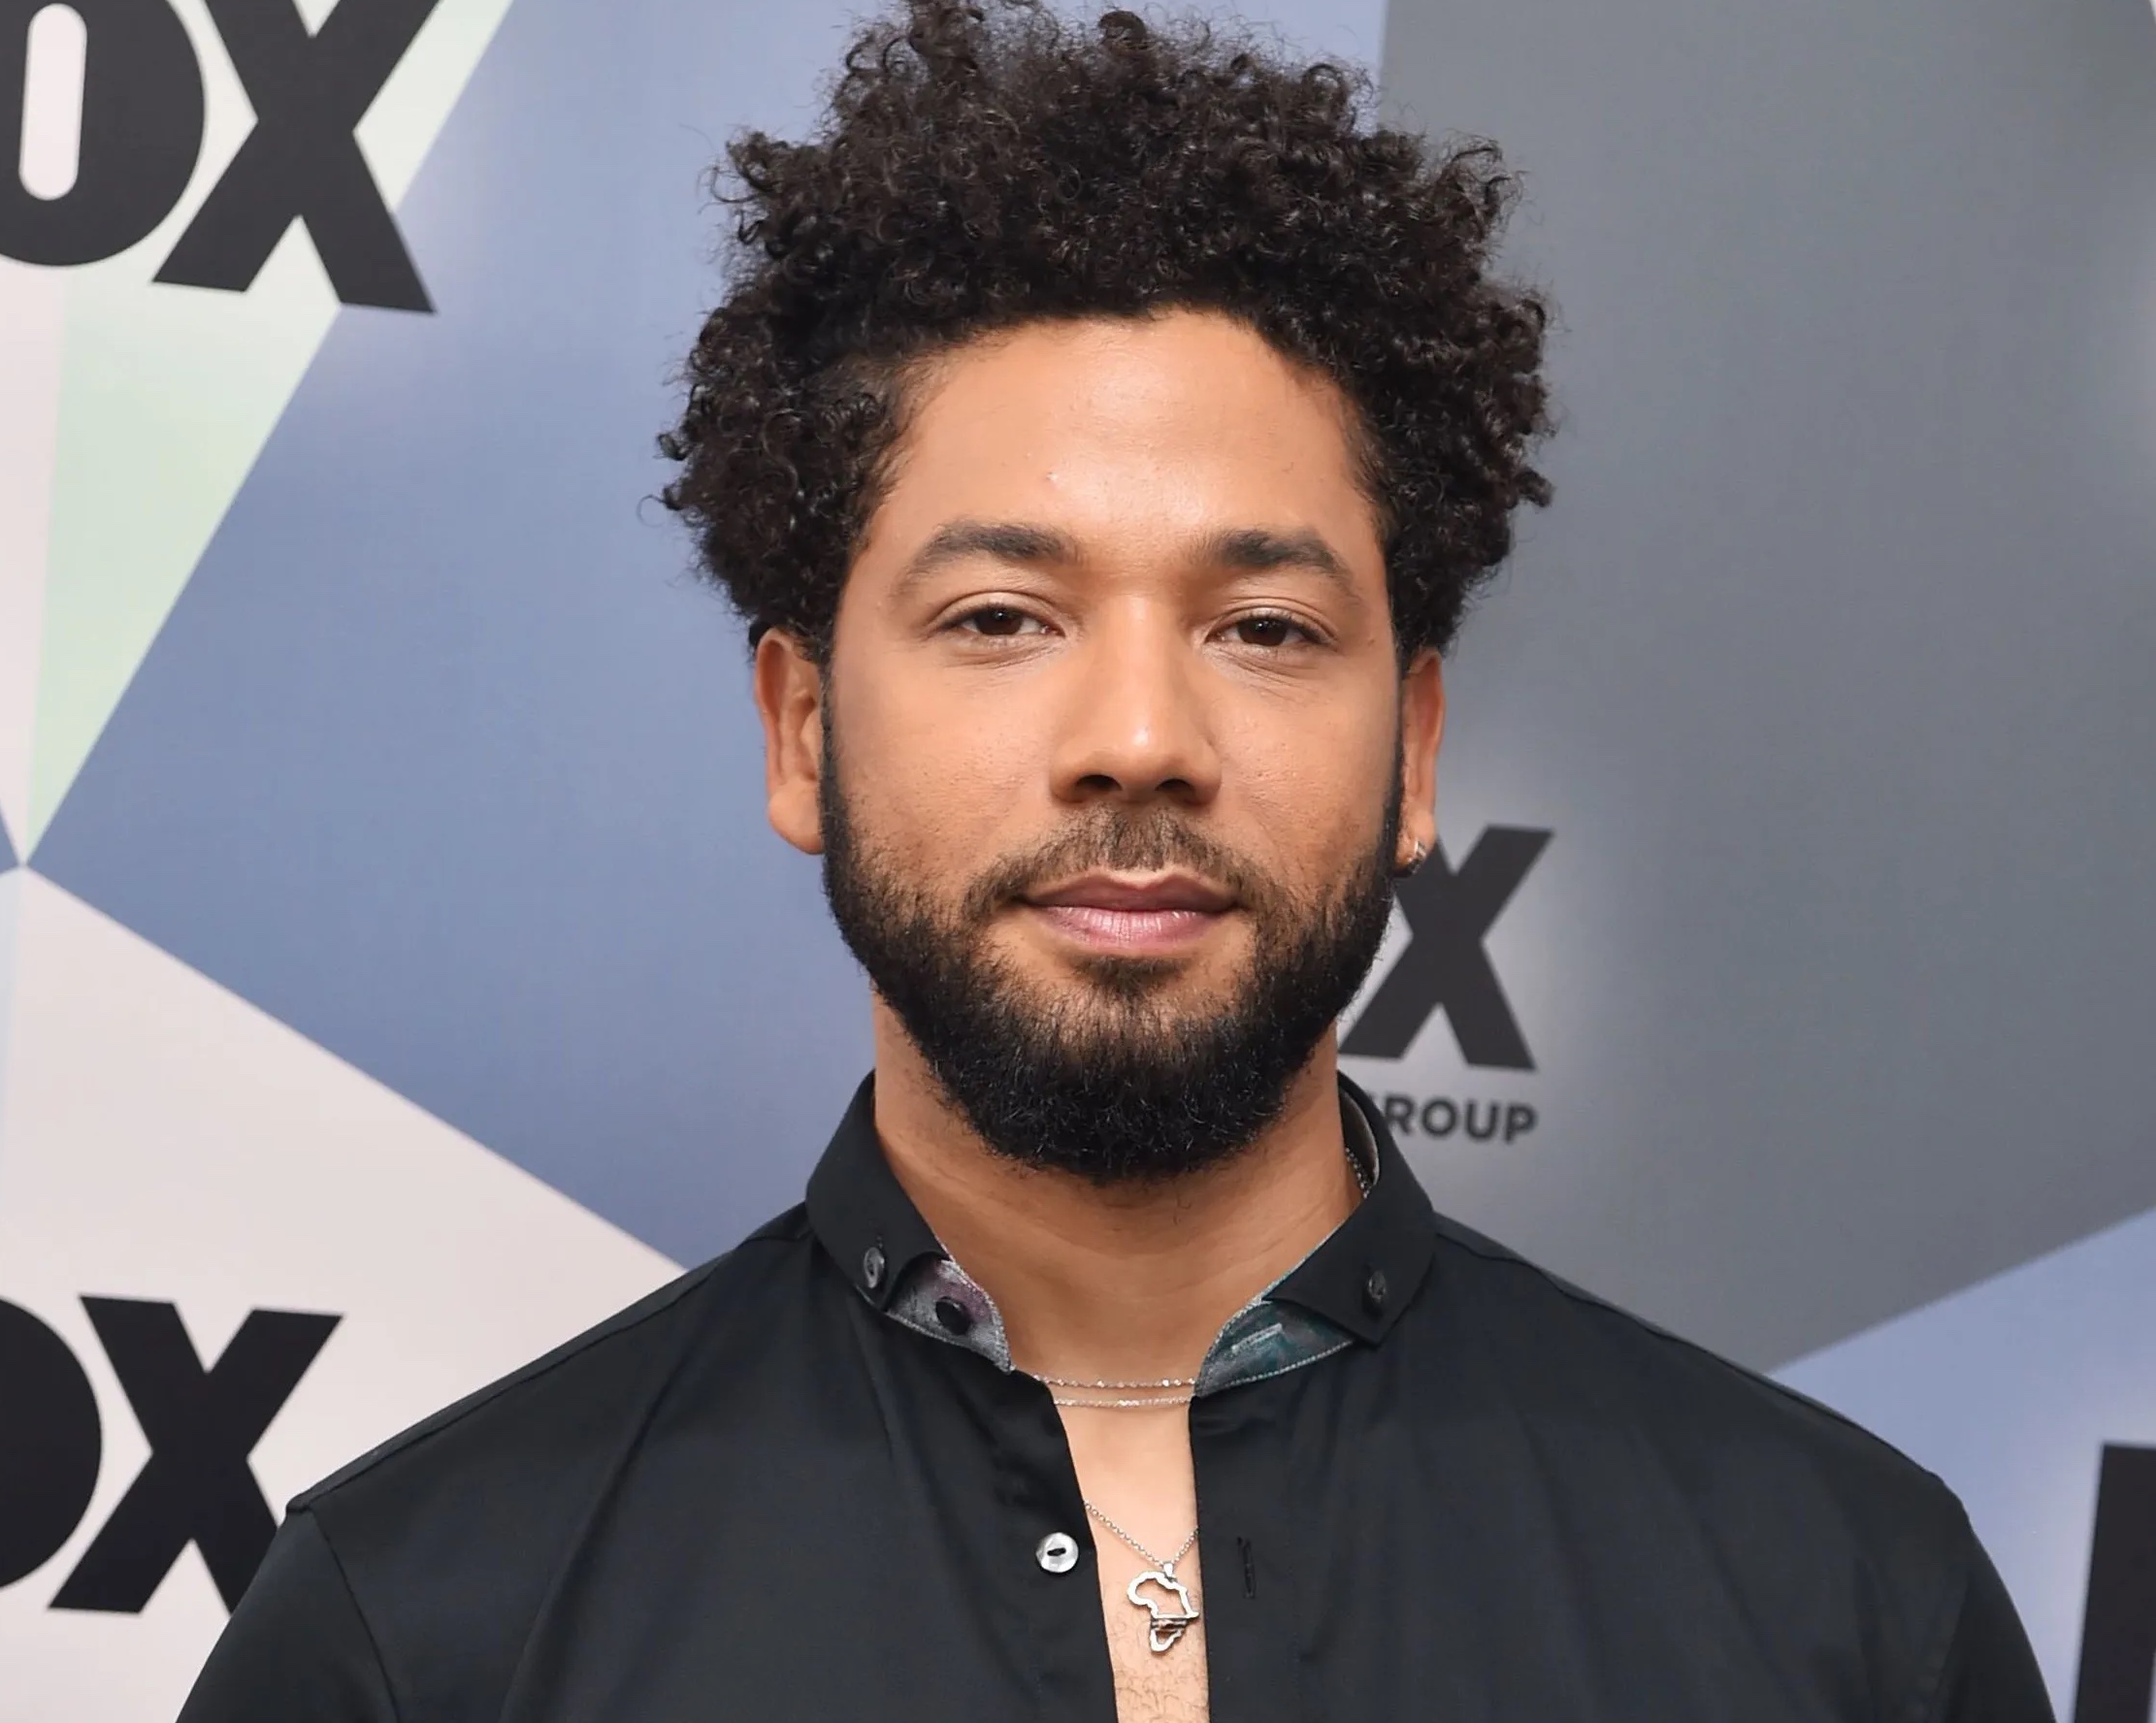 celebrities who fell from grace - Jussie Smollett - X X Roup